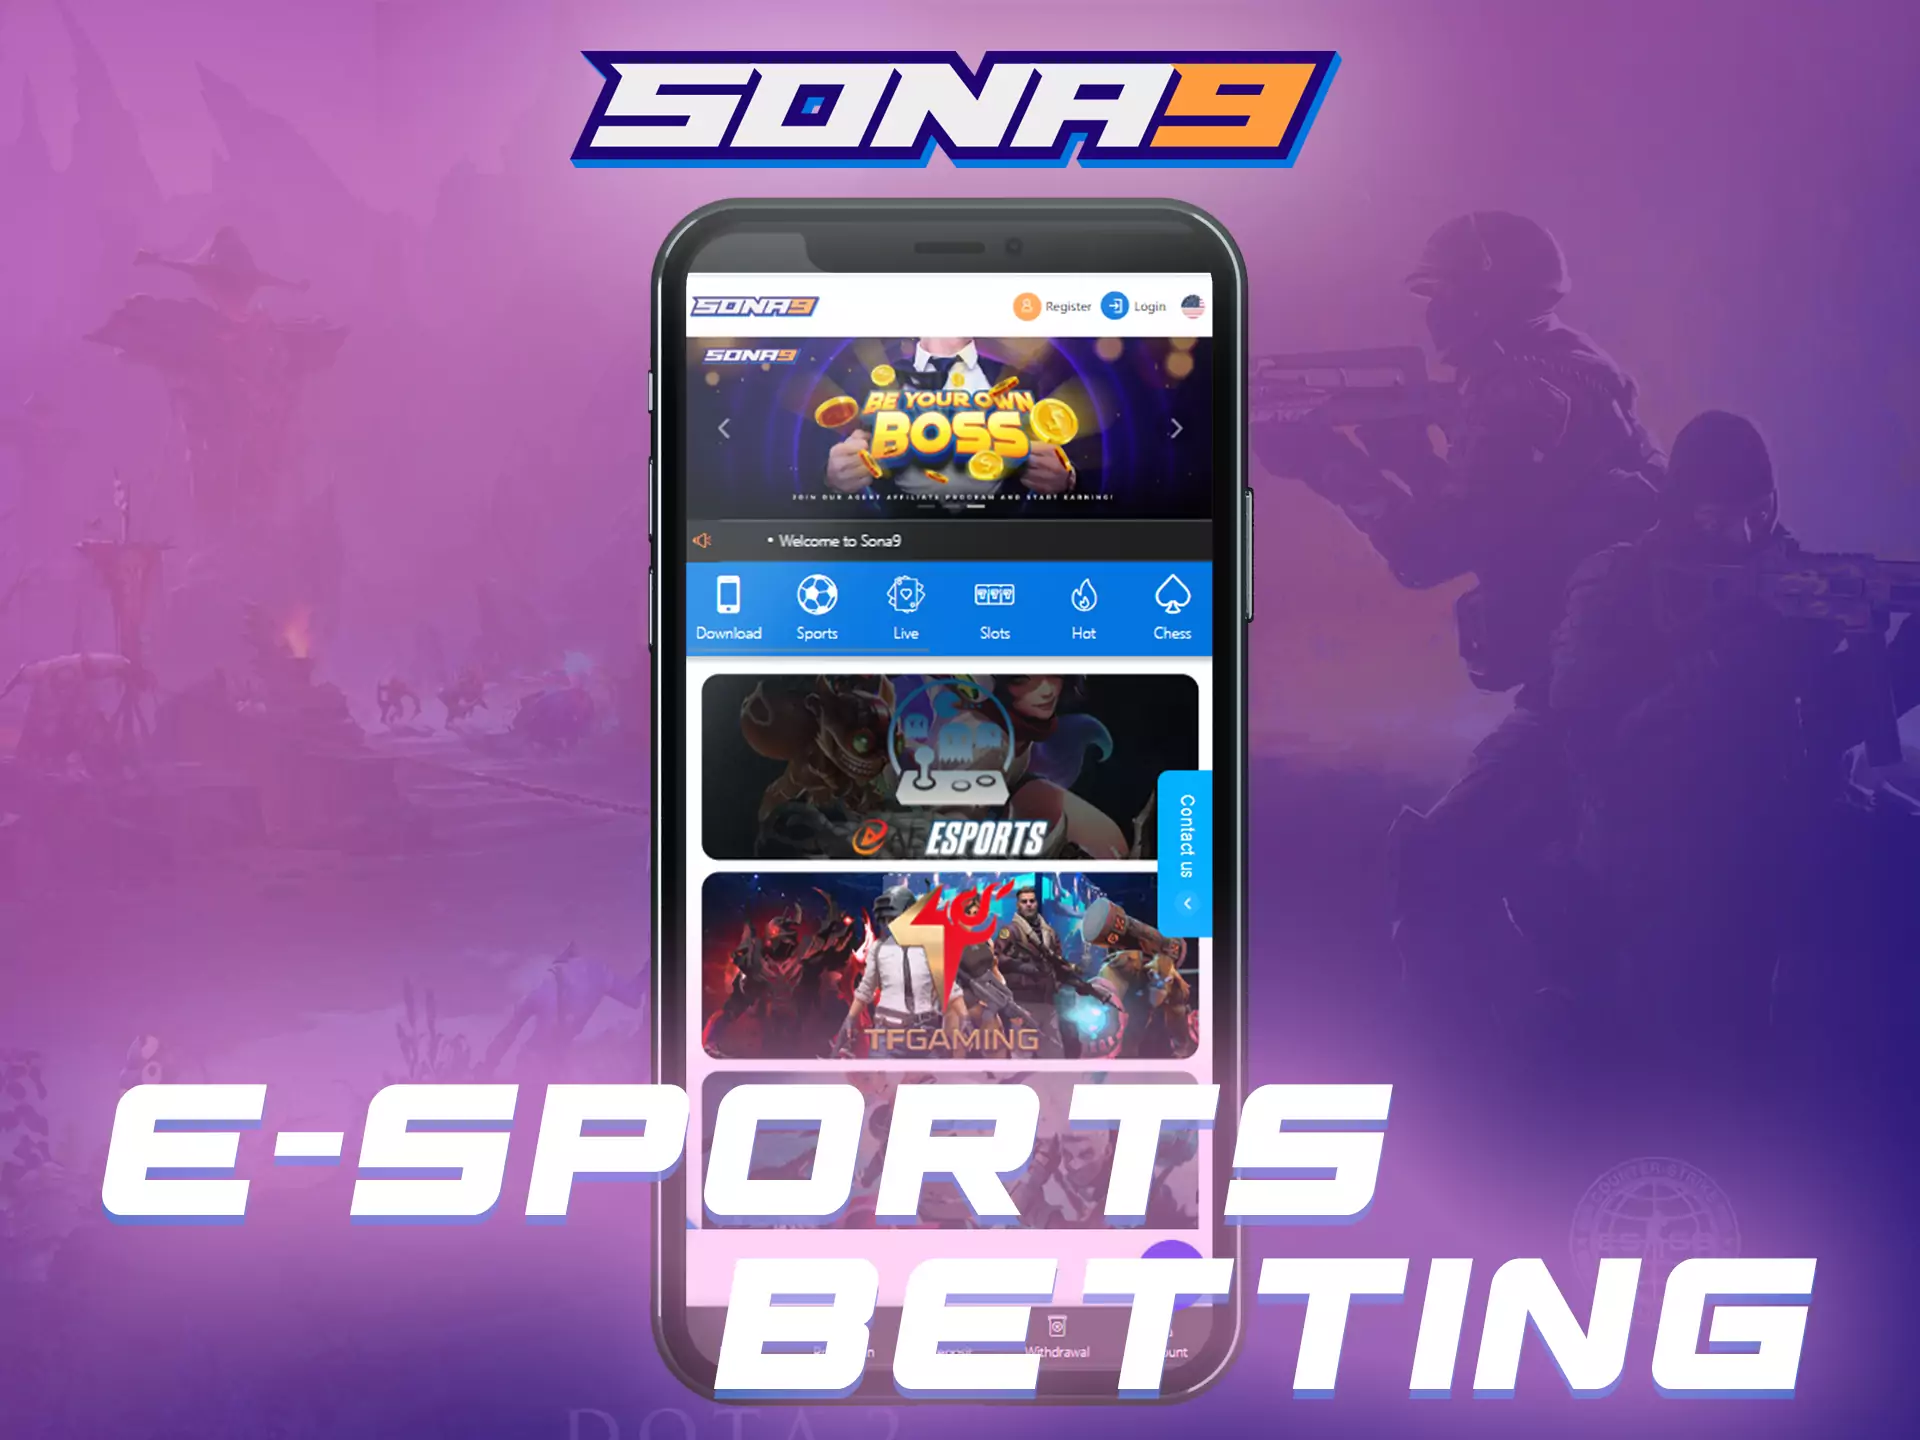 You can bet on esports events in the Sona9 app.